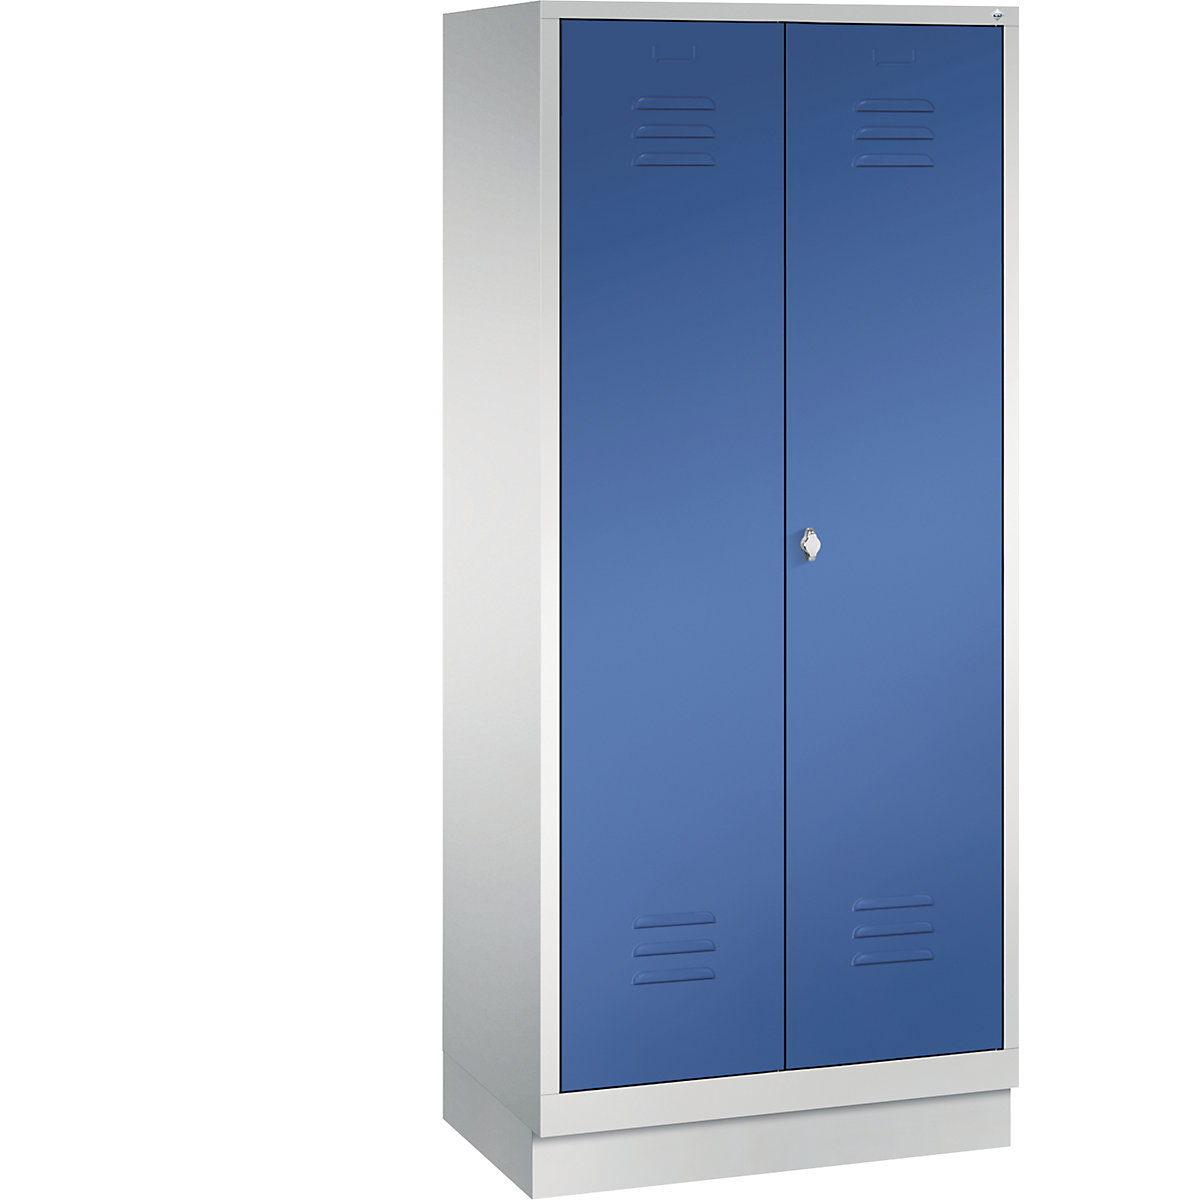 CLASSIC storage cupboard with plinth, doors close in the middle – C+P, 2 compartments, compartment width 400 mm, light grey / gentian blue-11